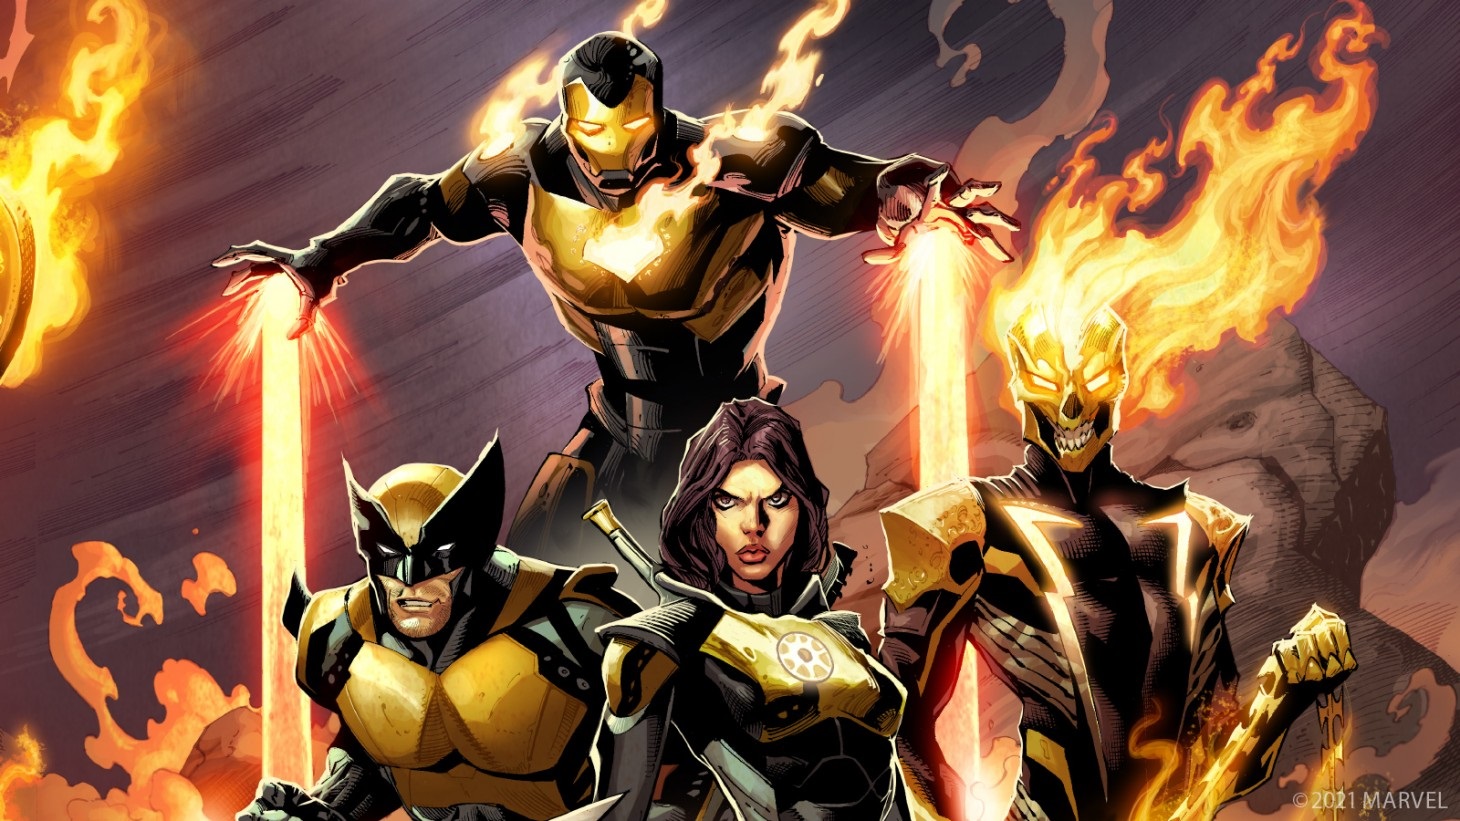 Marvel's Midnight Suns has been delayed, likely to 2023